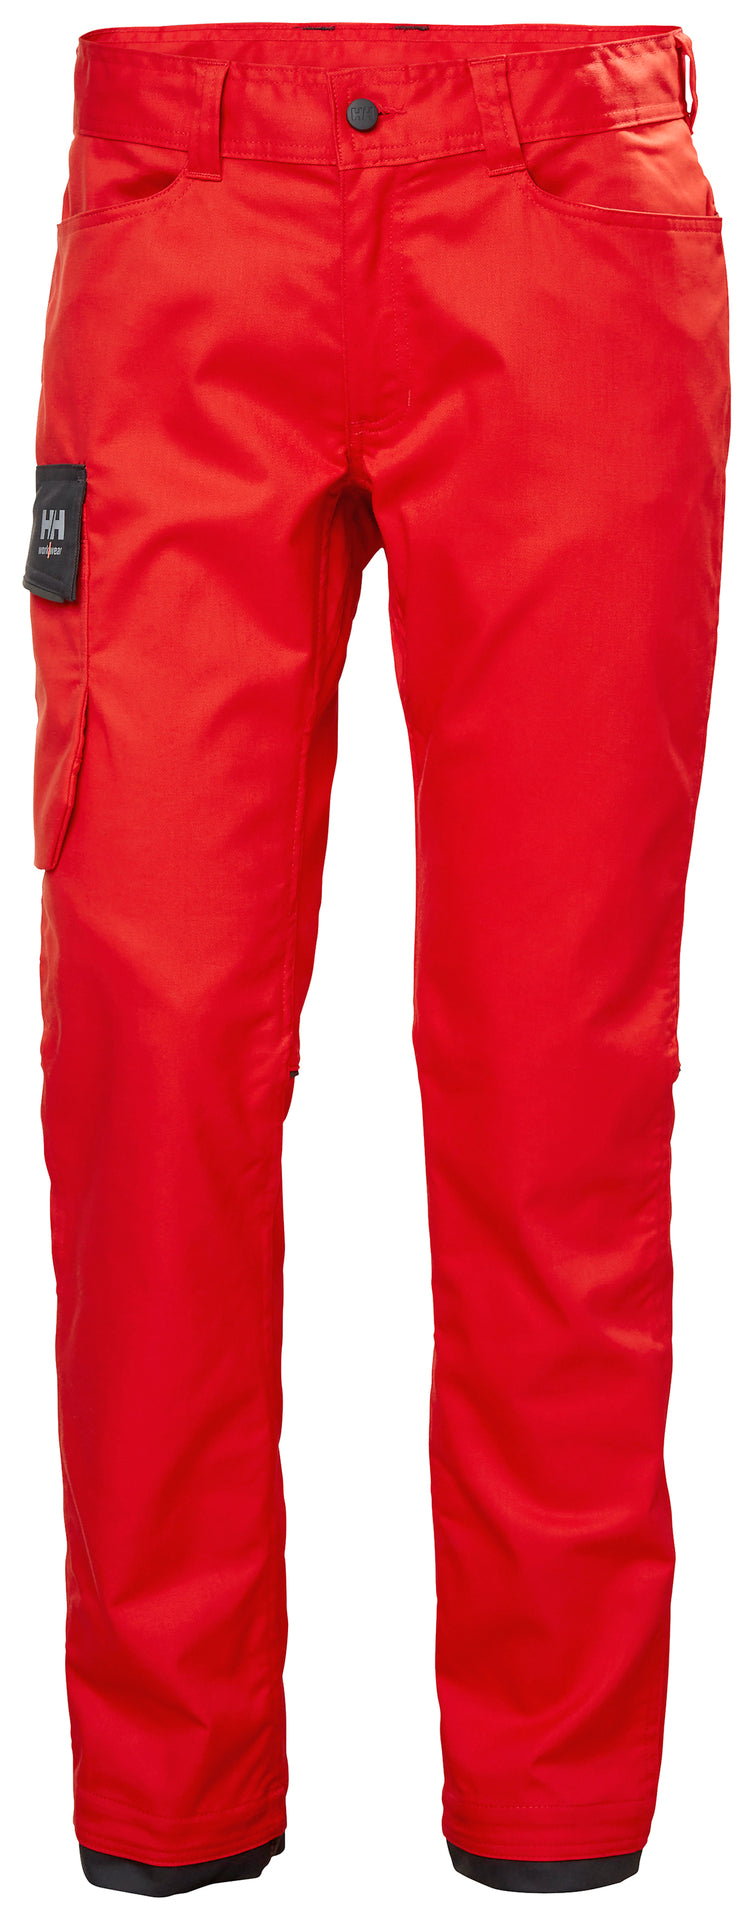 Helly Hansen Manchester Service Trousers - Red